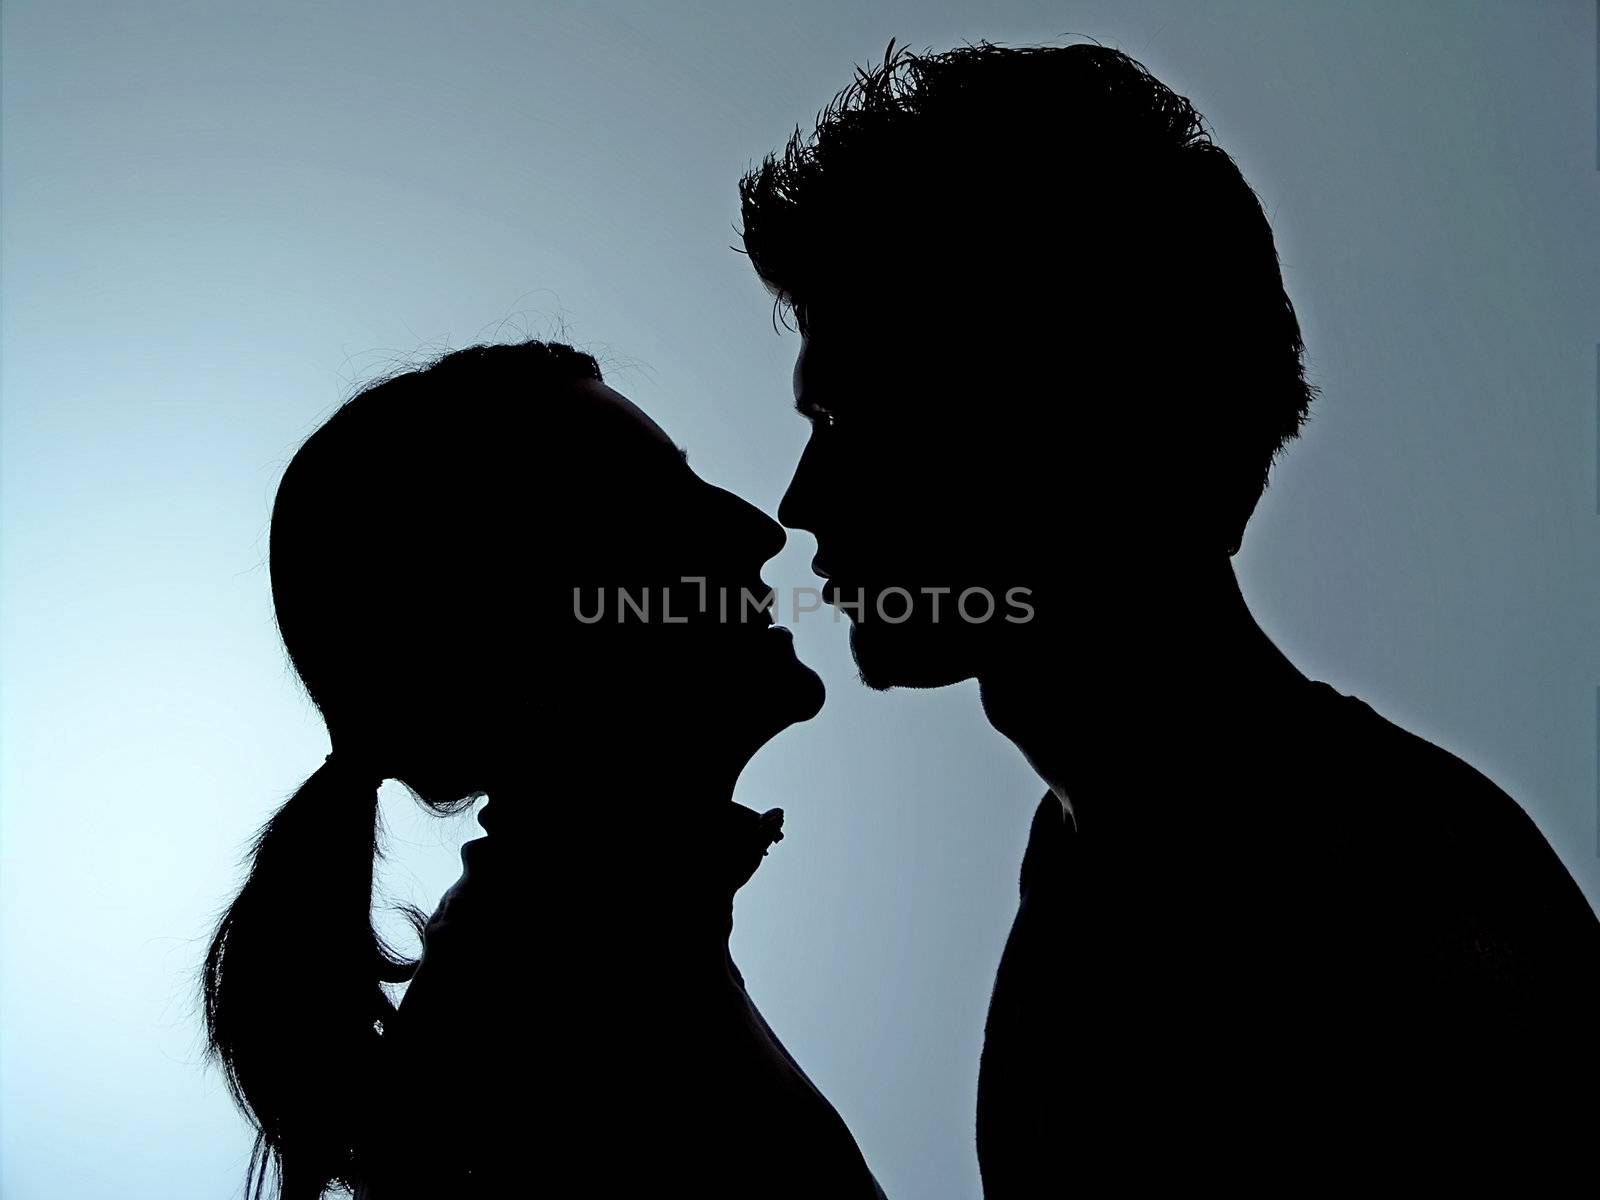 Two People in Silhouete